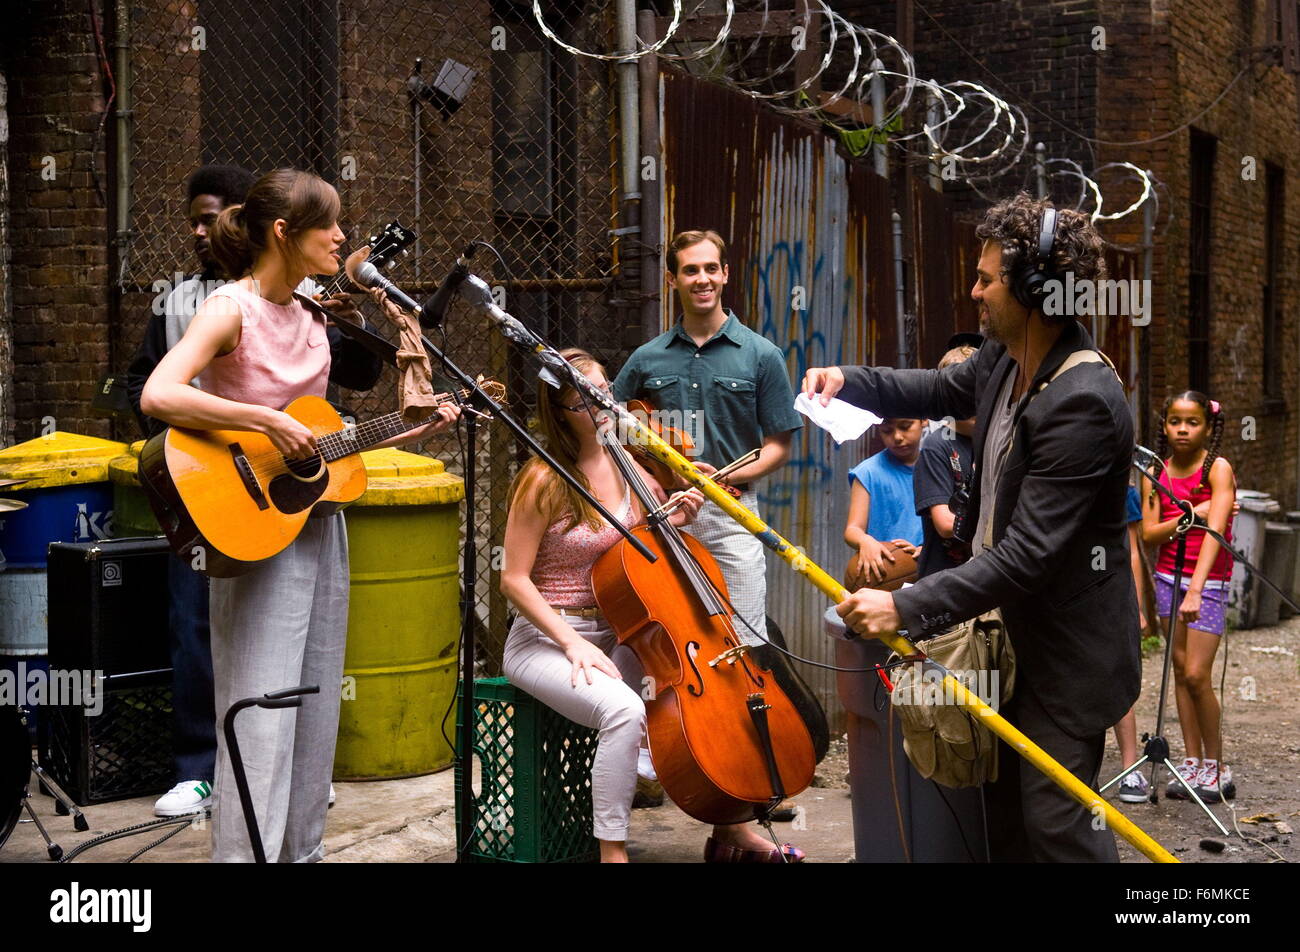 RELEASE DATE: July 4, 2014 TITLE: Begin Again STUDIO: Weinstein Company DIRECTOR: John Carney PLOT: A dejected music business executive forms a bond with a young singer-songwriter new to Manhattan PICTURED: KEIRA KNIGHTLEY as Greta and MARK RUFFALO as Dan (Credit: c Weinstein Company/Entertainment Pictures) Stock Photo